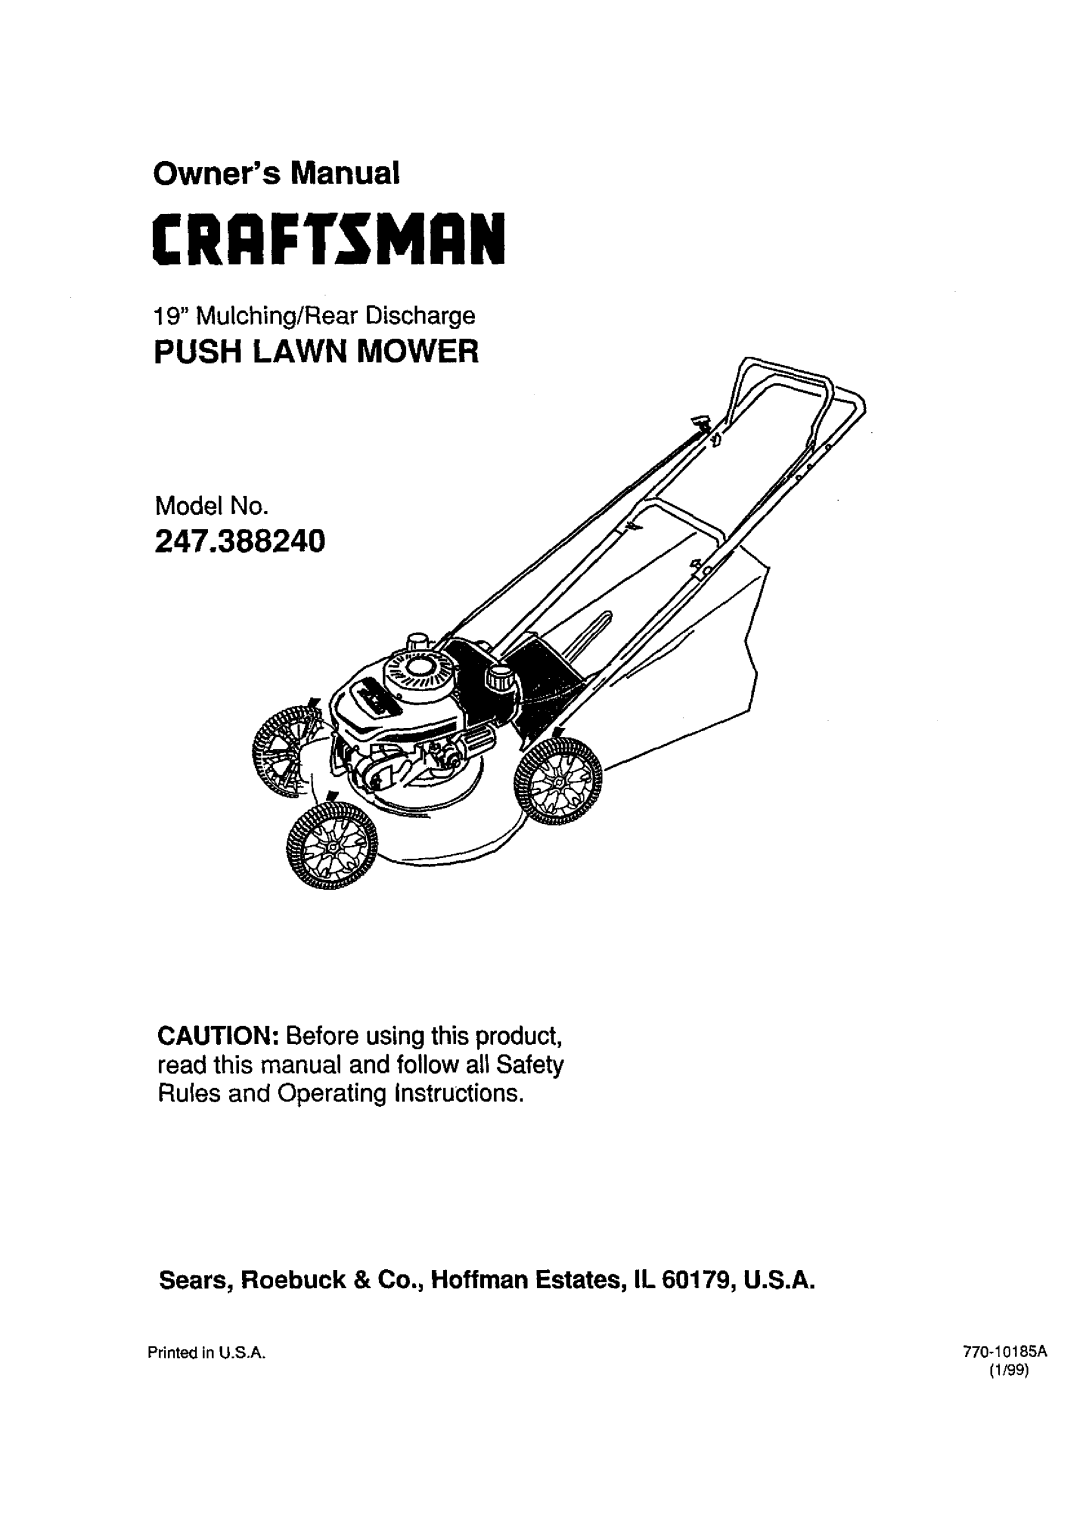 Craftsman 247.388240 owner manual CAUTION Before usingthis product, Mulching/Rear Discharge, Model No, Craftsmrn, 1/99 